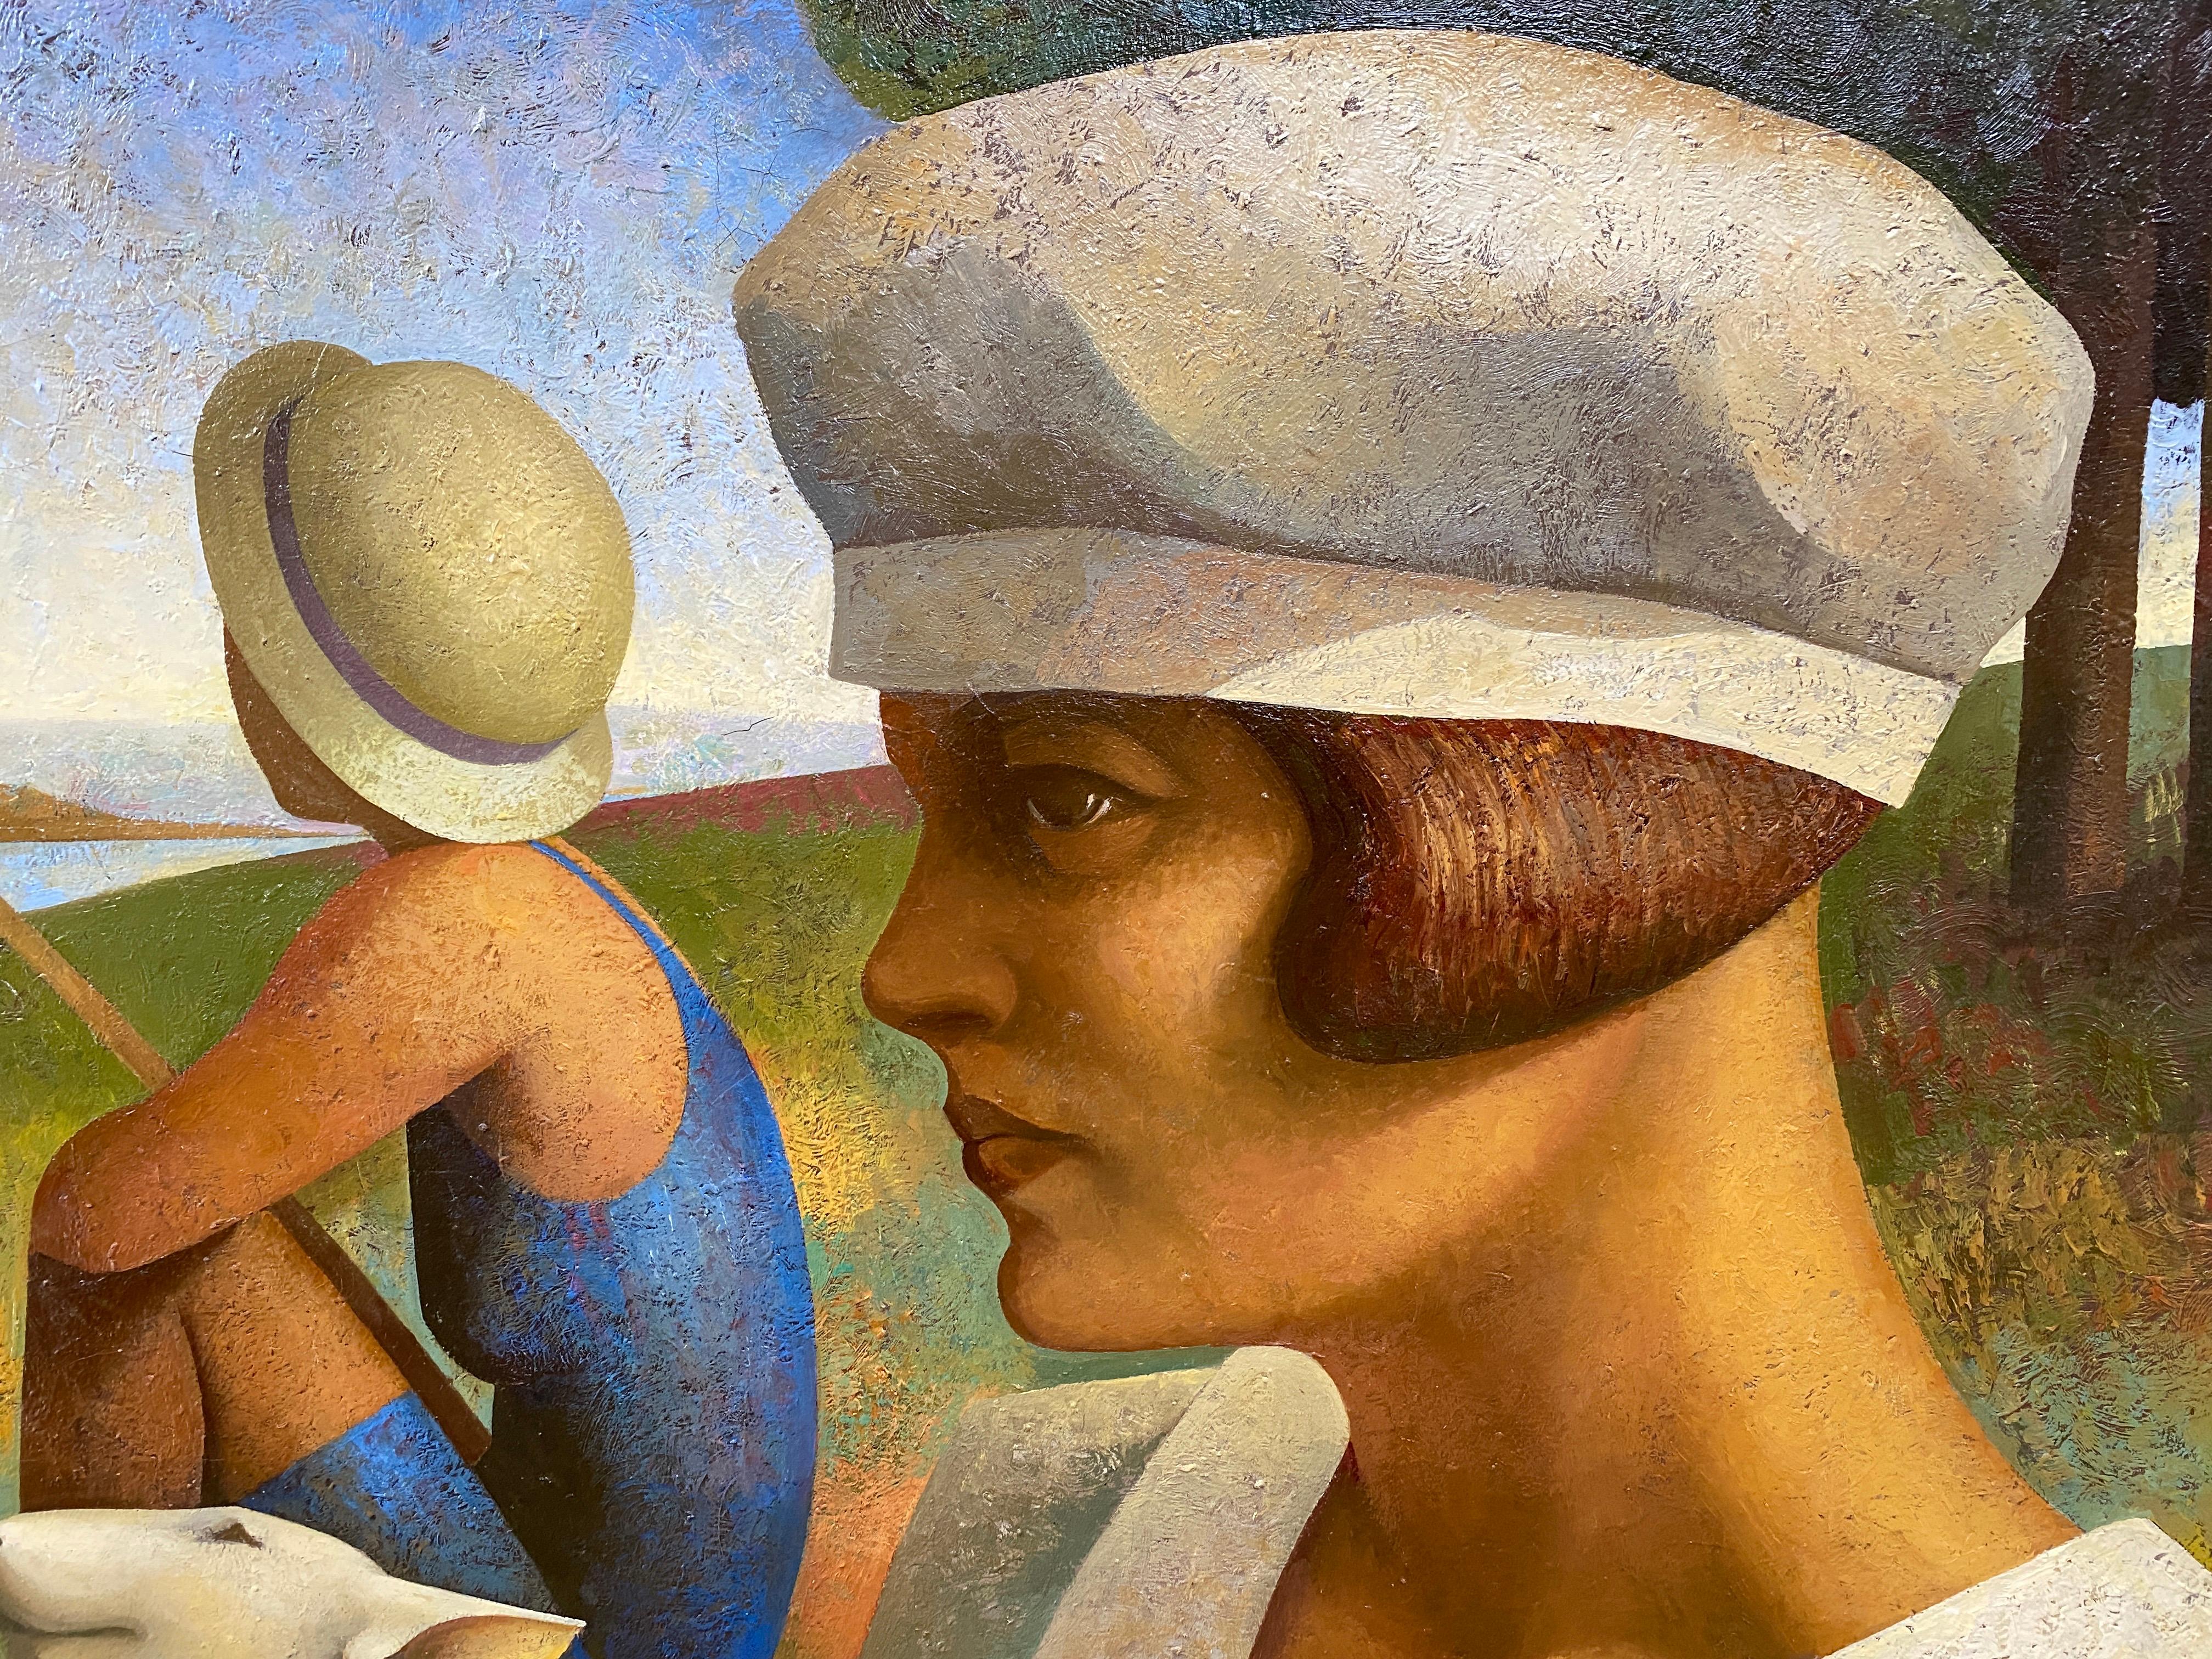 Reggatas day (tribute to Seurat), by Fabio Hurtado, is an oil painting on canvas which was created in 1995 and which obtained the Honorary Medal at the Certamen de Pintura BMW in Spain. The creator pays homage to Seurat, who was a peculiar figure